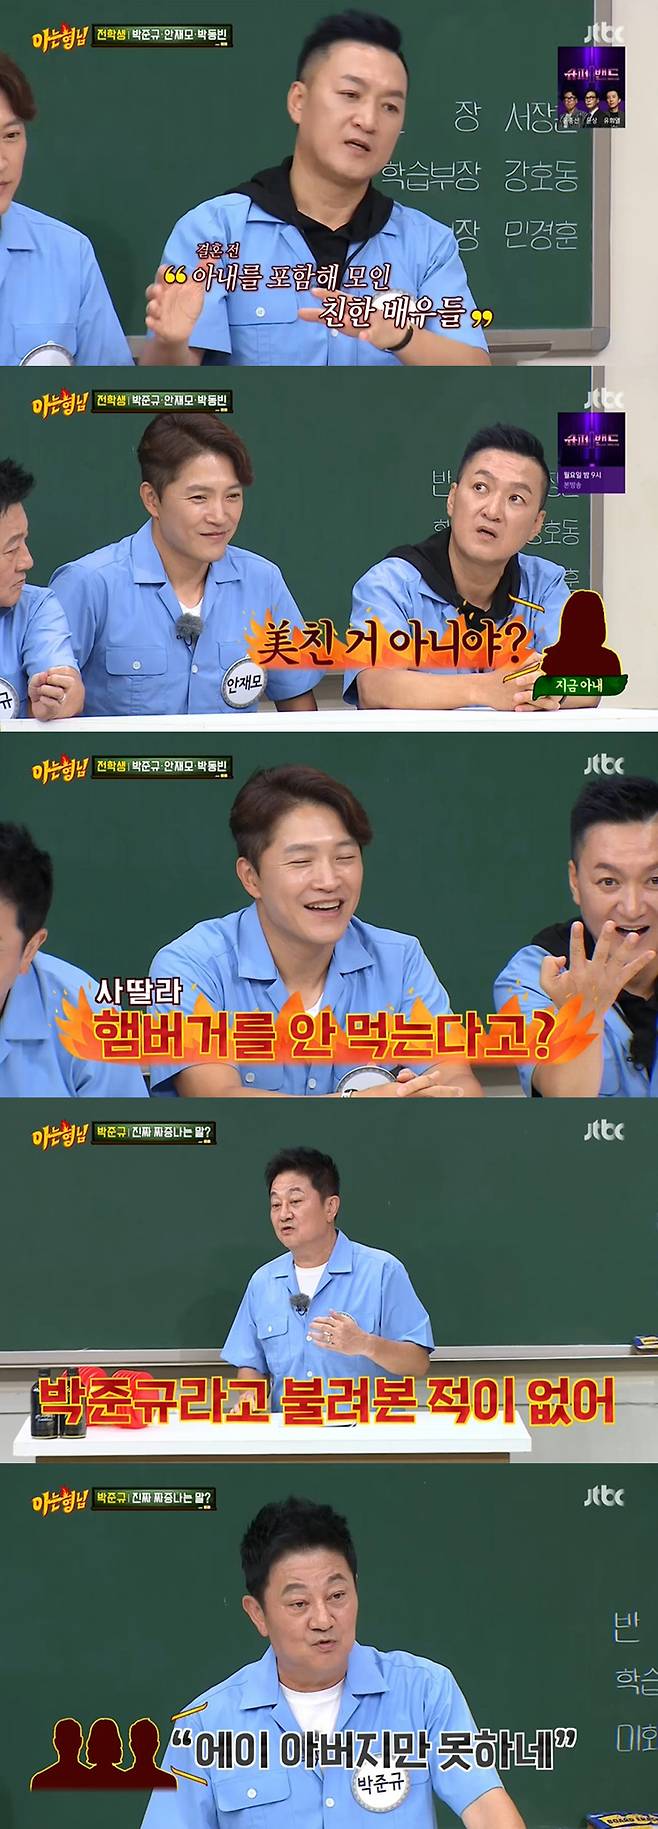 Knowing Bros Ahn Jae-mo, Park Jun-gyu and Park Dong-bin looked back on the Legend memories of Rustic Period.In the JTBC entertainment program Knowing Bros broadcasted on the 31st, Ahn Jae-mo, Park Jun-gyu and Park Dong-bin, who starred in Rustic Period, appeared as guests.Rustic Period, where the three people played, was a national drama with a highest audience rating of 57%. Even the duel with Kumajuk soared to 64%.Ahn Jae-mo recalled the huge popularity of I went out to the broadcast time and drank alcohol, because people were watching the broadcast and there was no one on the street.Recently, Rustic Period has also been reversed, and students know Ahn Jae-mo. A lot of elementary school students have come out these days.My daughter went to the academy and she said, What kind of kid is your father Kim Doo-han? My son boasts that he is our father Kim Doo-han.However, Ahn Jae-mo said, I almost could not play Kim Doo-han. I was cast a year ago and went to the action school and prepared my body hard.I was told that I was giving Kim Doo-han to another person in the directors line for a year, and he was more popular than me and was a star. I could not sleep because of the stress.But the bishop pushed me to the end. I was tearful because I was hit by a big hit and later I cried to the officials, What if I did not do Ahn Jae-mo?In the meantime, Park Jun-gyu initially refused to play the role of Ssangkal; Park Jun-gyu try not to; he played the role of Ssangkal in the drama The Wangcho.I did not want to do it because the station came in again. But my wife said that I should do this unconditionally.Park Dong-bin not only played Rustic Period but also Juice The Man from Nowhere.But the legend, Juice, said, I almost edited it. The script said that I was surprised and fired Juice.I was surprised and thought it was NG. I had an editorial crisis because I had an opinion that it was a morning drama among the production crews and it was dirty.Fortunately, the scene is not edited and is being talked about as Legend scene. Park Dong-bin also thanked his opponent Park Si-eun. I think Si-eun is really great.I bit my tongue in this serious god and put up with laughter. Park Dong-bin is a love erroneous bridge that his best friend Ahn Jae-mo has now connected with his wife. Park Dong-bin said, Before marriage, there was a meeting with his mother and wife.When I was drinking beer and the atmosphere was good, I said to my wife, What are you doing on the weekend? And I said, Nothing. So, Will we marriage at two?I did it, and I was crazy.  I did not think I could see the Friend after that. So I told my mother, How do you do it? She went straight to the friend and said I was a good kid, but I was good. I was a big player in the middle of a year of shamanism.Ahn Jae-mo praised Park Dong-bin, saying, When men see it, it is a very reasonable and good person.Ahn Jae-mo did a special Top Model, saying that her daughter, an aspiring singer, is an IU fan, and that if she scores more than 90 points in karaoke, she will receive an IU sign through Kim Hee-chul.Ahn Jae-mo was enthusiastic about the Yain of Kang Sung, a Rustic Period OST, and succeeded in Top Model and received an IU sign.Park Jun-gyu said it was hard to hear a child being a better character than his father, and Park Jun-gyu looked back when he was overshadowed by his father, Park No-sik.Park Jun-gyu has never been called Park Jun-gyu. He was a son of Park No-sik for a lifetime. I grow up as a son of Park No-sik for a lifetime and know that I will be okay.But I heard it too long. Park Jun-gyu said, I heard it until I was over 30 years old and became a double knife.I am glad that I have enough time now. Is not my son debut now? My grandfather was cool, my father was cool, and my children were cool.But it is a little bit better that children are much better than fathers. In the past, I was not able to do it only because I can not do it now.Thats why its hard, he said.Park Jun-gyus two sons, Park Jong-chan and Park Jong-hyuk, both made their debut as actors; their eldest son, Park Jong-chan, is thirty, but Park Jun-gyu and his sons still do one kiss a day.When I sleep, I always kiss, Park Jun-gyu said. I have something I can not do to my father. My father did not see me go well with a double knife.I think my father would have felt like hearing Park Jun-gyus father?Park Dong-bin, who succeeded in marriage at the age of 52, cited name as a reason for not being marriage for a long time. Park Dong-bin said, In the past, the monk told my mother to change her sons name.His real name is Park Jong-moon. He said there were too many flowers in his name. He gave me the name Park Dong-bin, saying that if I changed my name, it would be brilliant and flower would fall.However, Park Dong-bin said, The first place is not so good and the flower is falling. If the work is not solved, I fought a lot.It is very heartbreaking, he said, expressing his sorry heart to his mother.